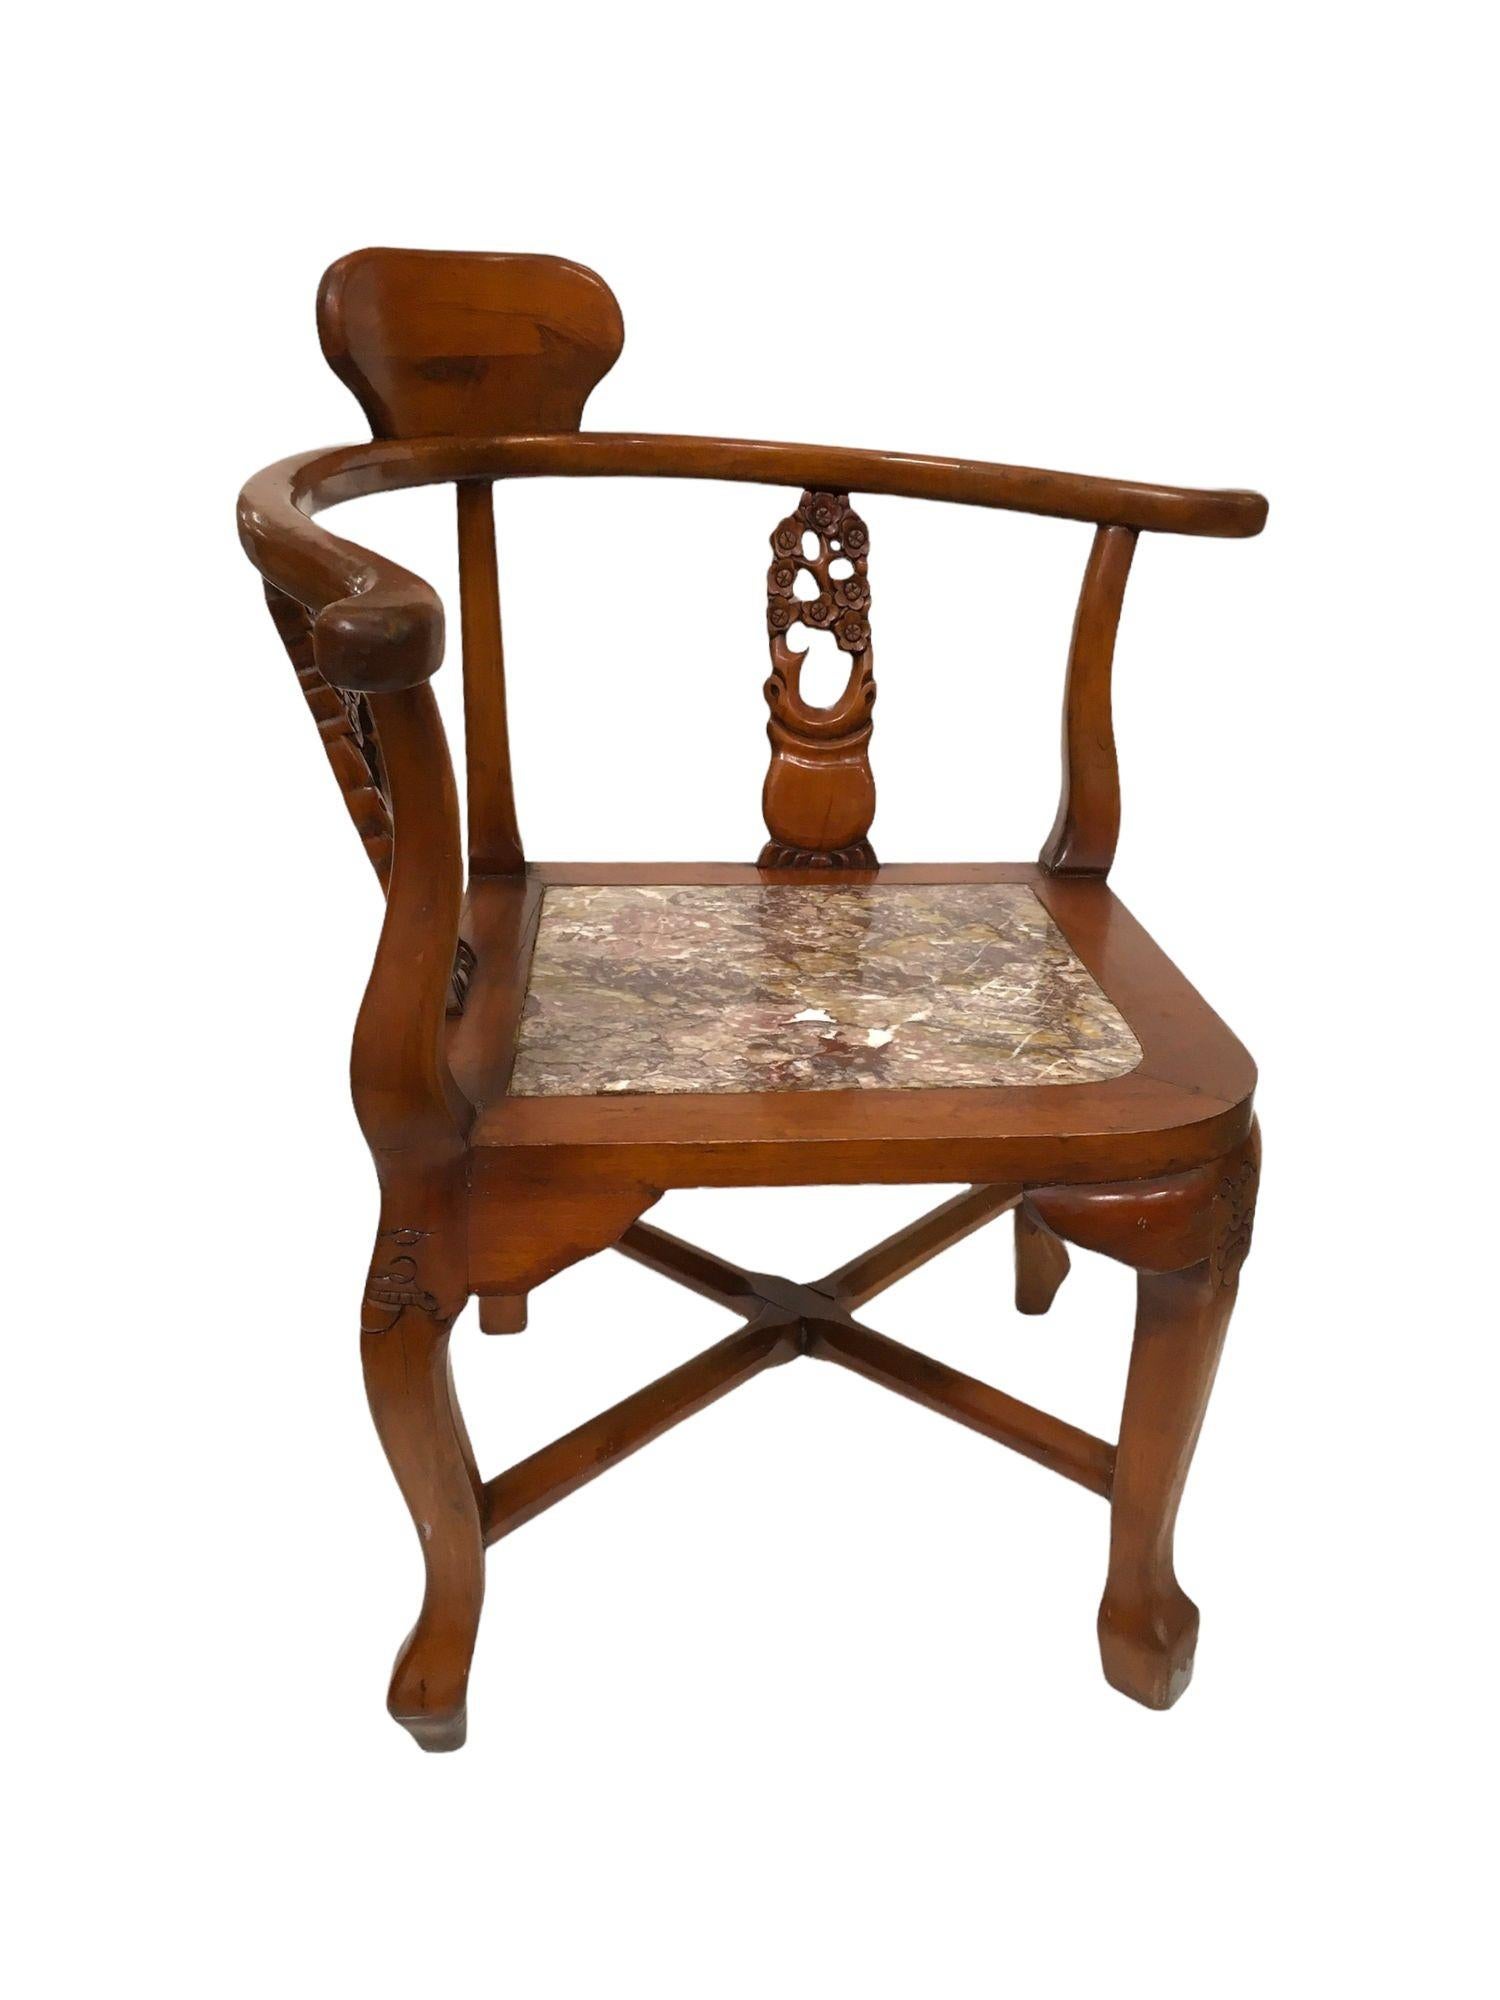 Late 20th Century Rosewood Horseshoe Chair with Marble Seat by James Mont, Pair For Sale